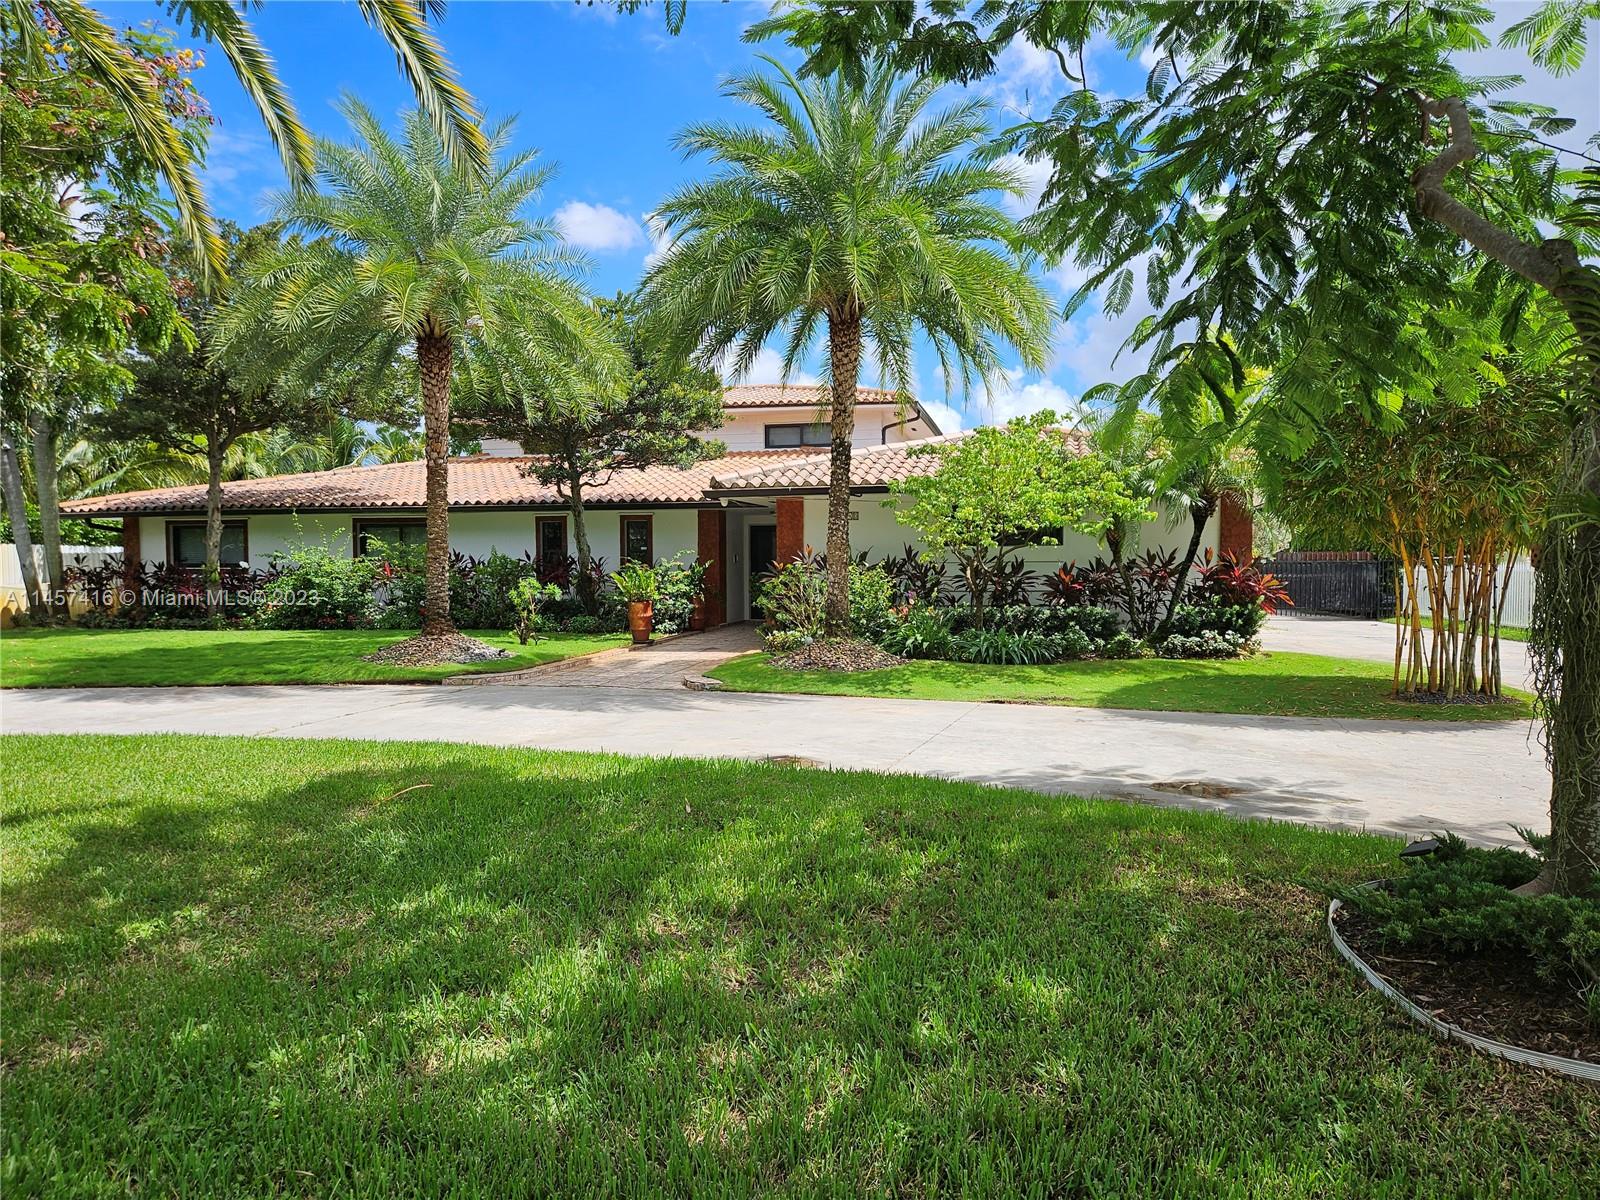 2040 Nw 111th St St, Miami, Broward County, Florida - 5 Bedrooms  
3 Bathrooms - 